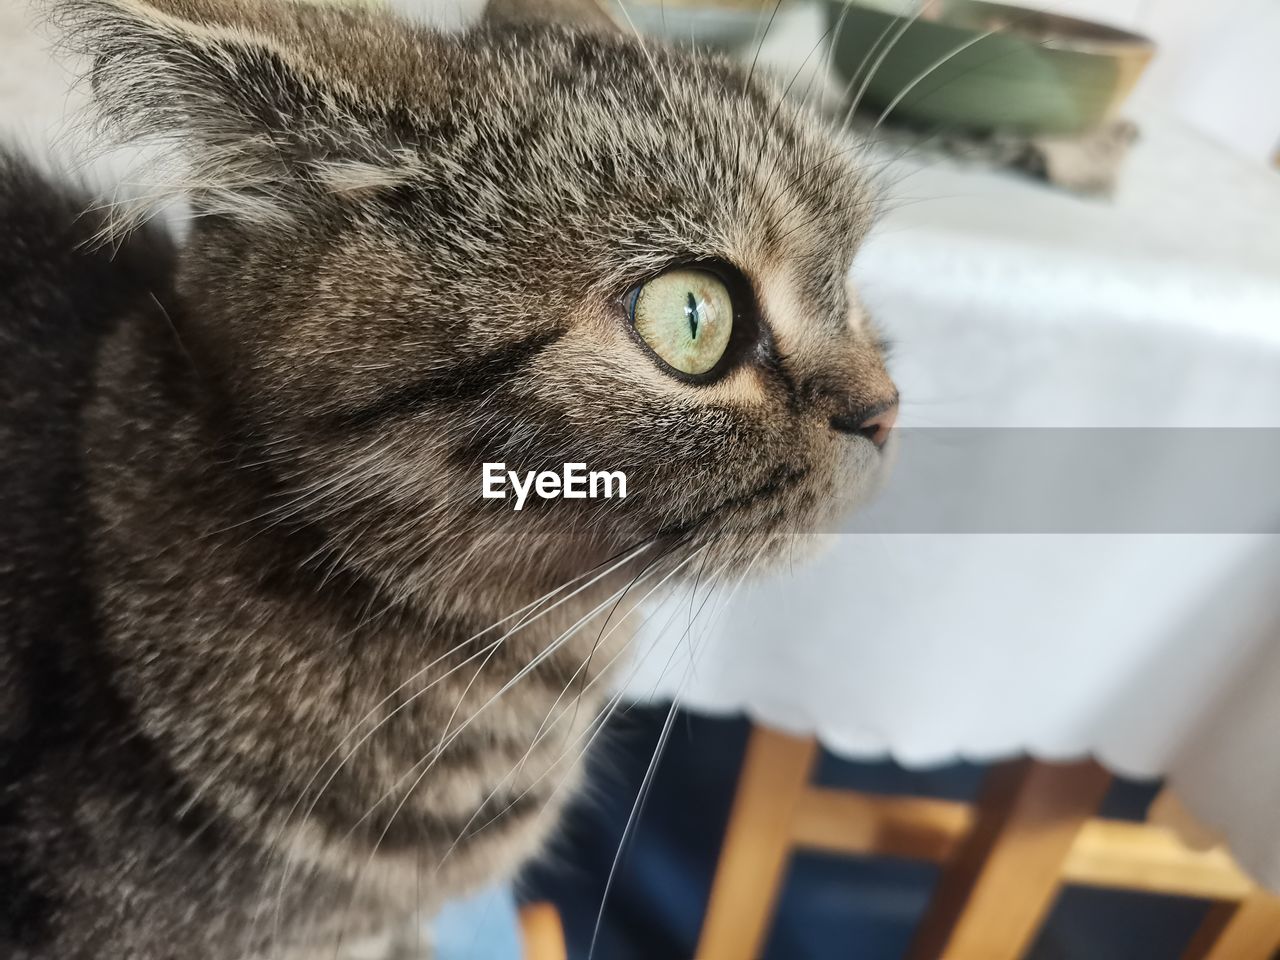 pet, animal, domestic animals, animal themes, cat, mammal, domestic cat, one animal, feline, whiskers, animal body part, close-up, felidae, indoors, small to medium-sized cats, animal head, looking, no people, focus on foreground, tabby cat, animal hair, carnivore, eye, portrait, animal eye